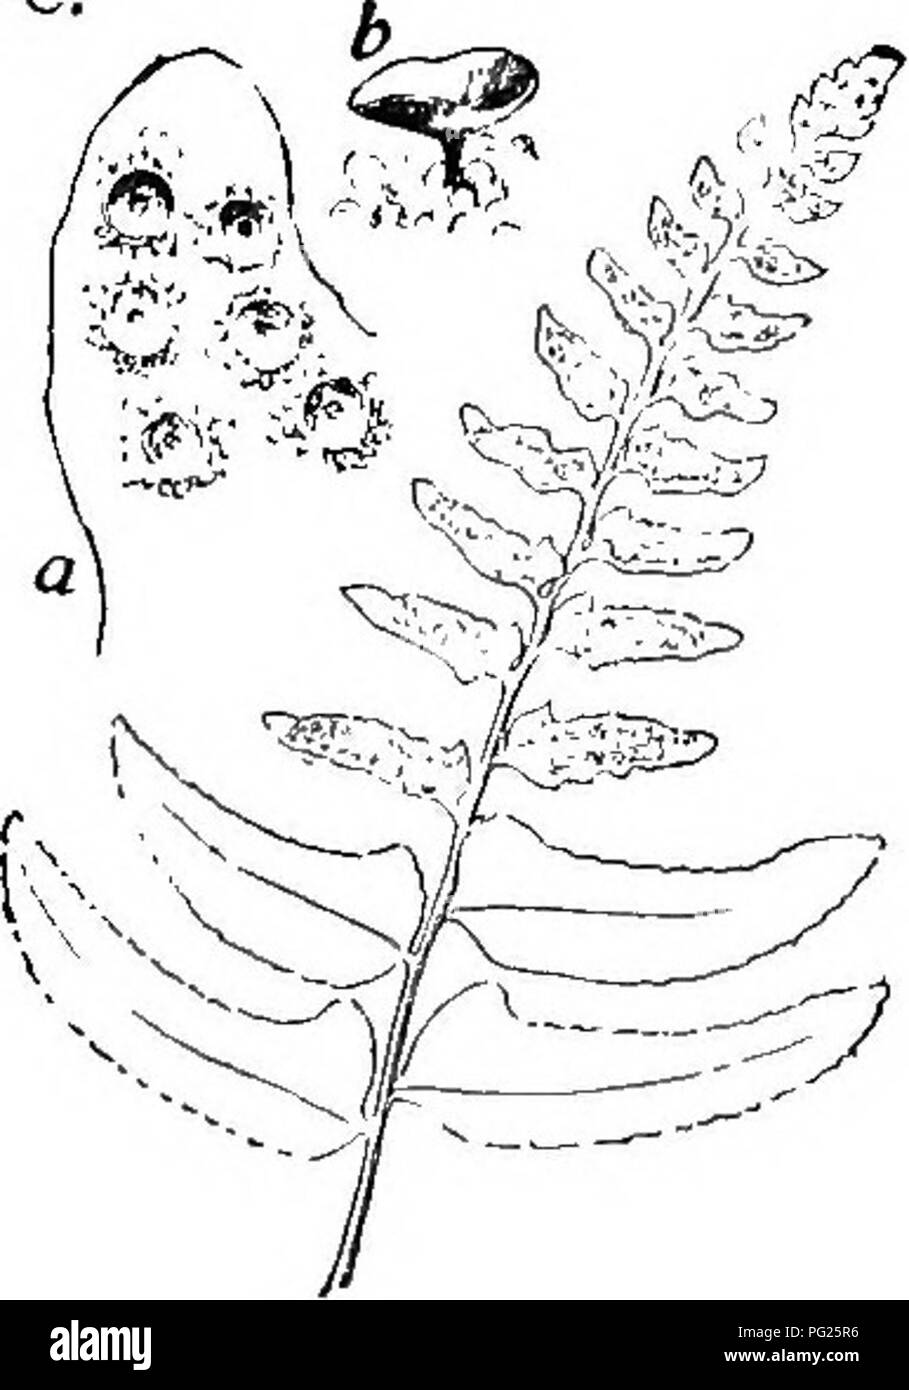 . Beginners' botany. Botany. Fig. 254. —Christmas Fern. — Dryopteris acrostichoides; known also as Aspidium. Prominent among the spore- propagated plants are ferns. The common Christmas fern (so called because it remains green during winter) is shown in Fig. 254. The plant has no trunk. The leaves spring directly from the ground. The leaves of ferns are called fronds. They vary in shape, as other leaves do. Some of the fronds in Fig. 254 are seen to be narrower at the top. If these are examined more closely (Fig. 255), 176. Fig. 255. — Fruiting FtoND OF Christmas Fern. Sori at a. One sorus wit Stock Photo